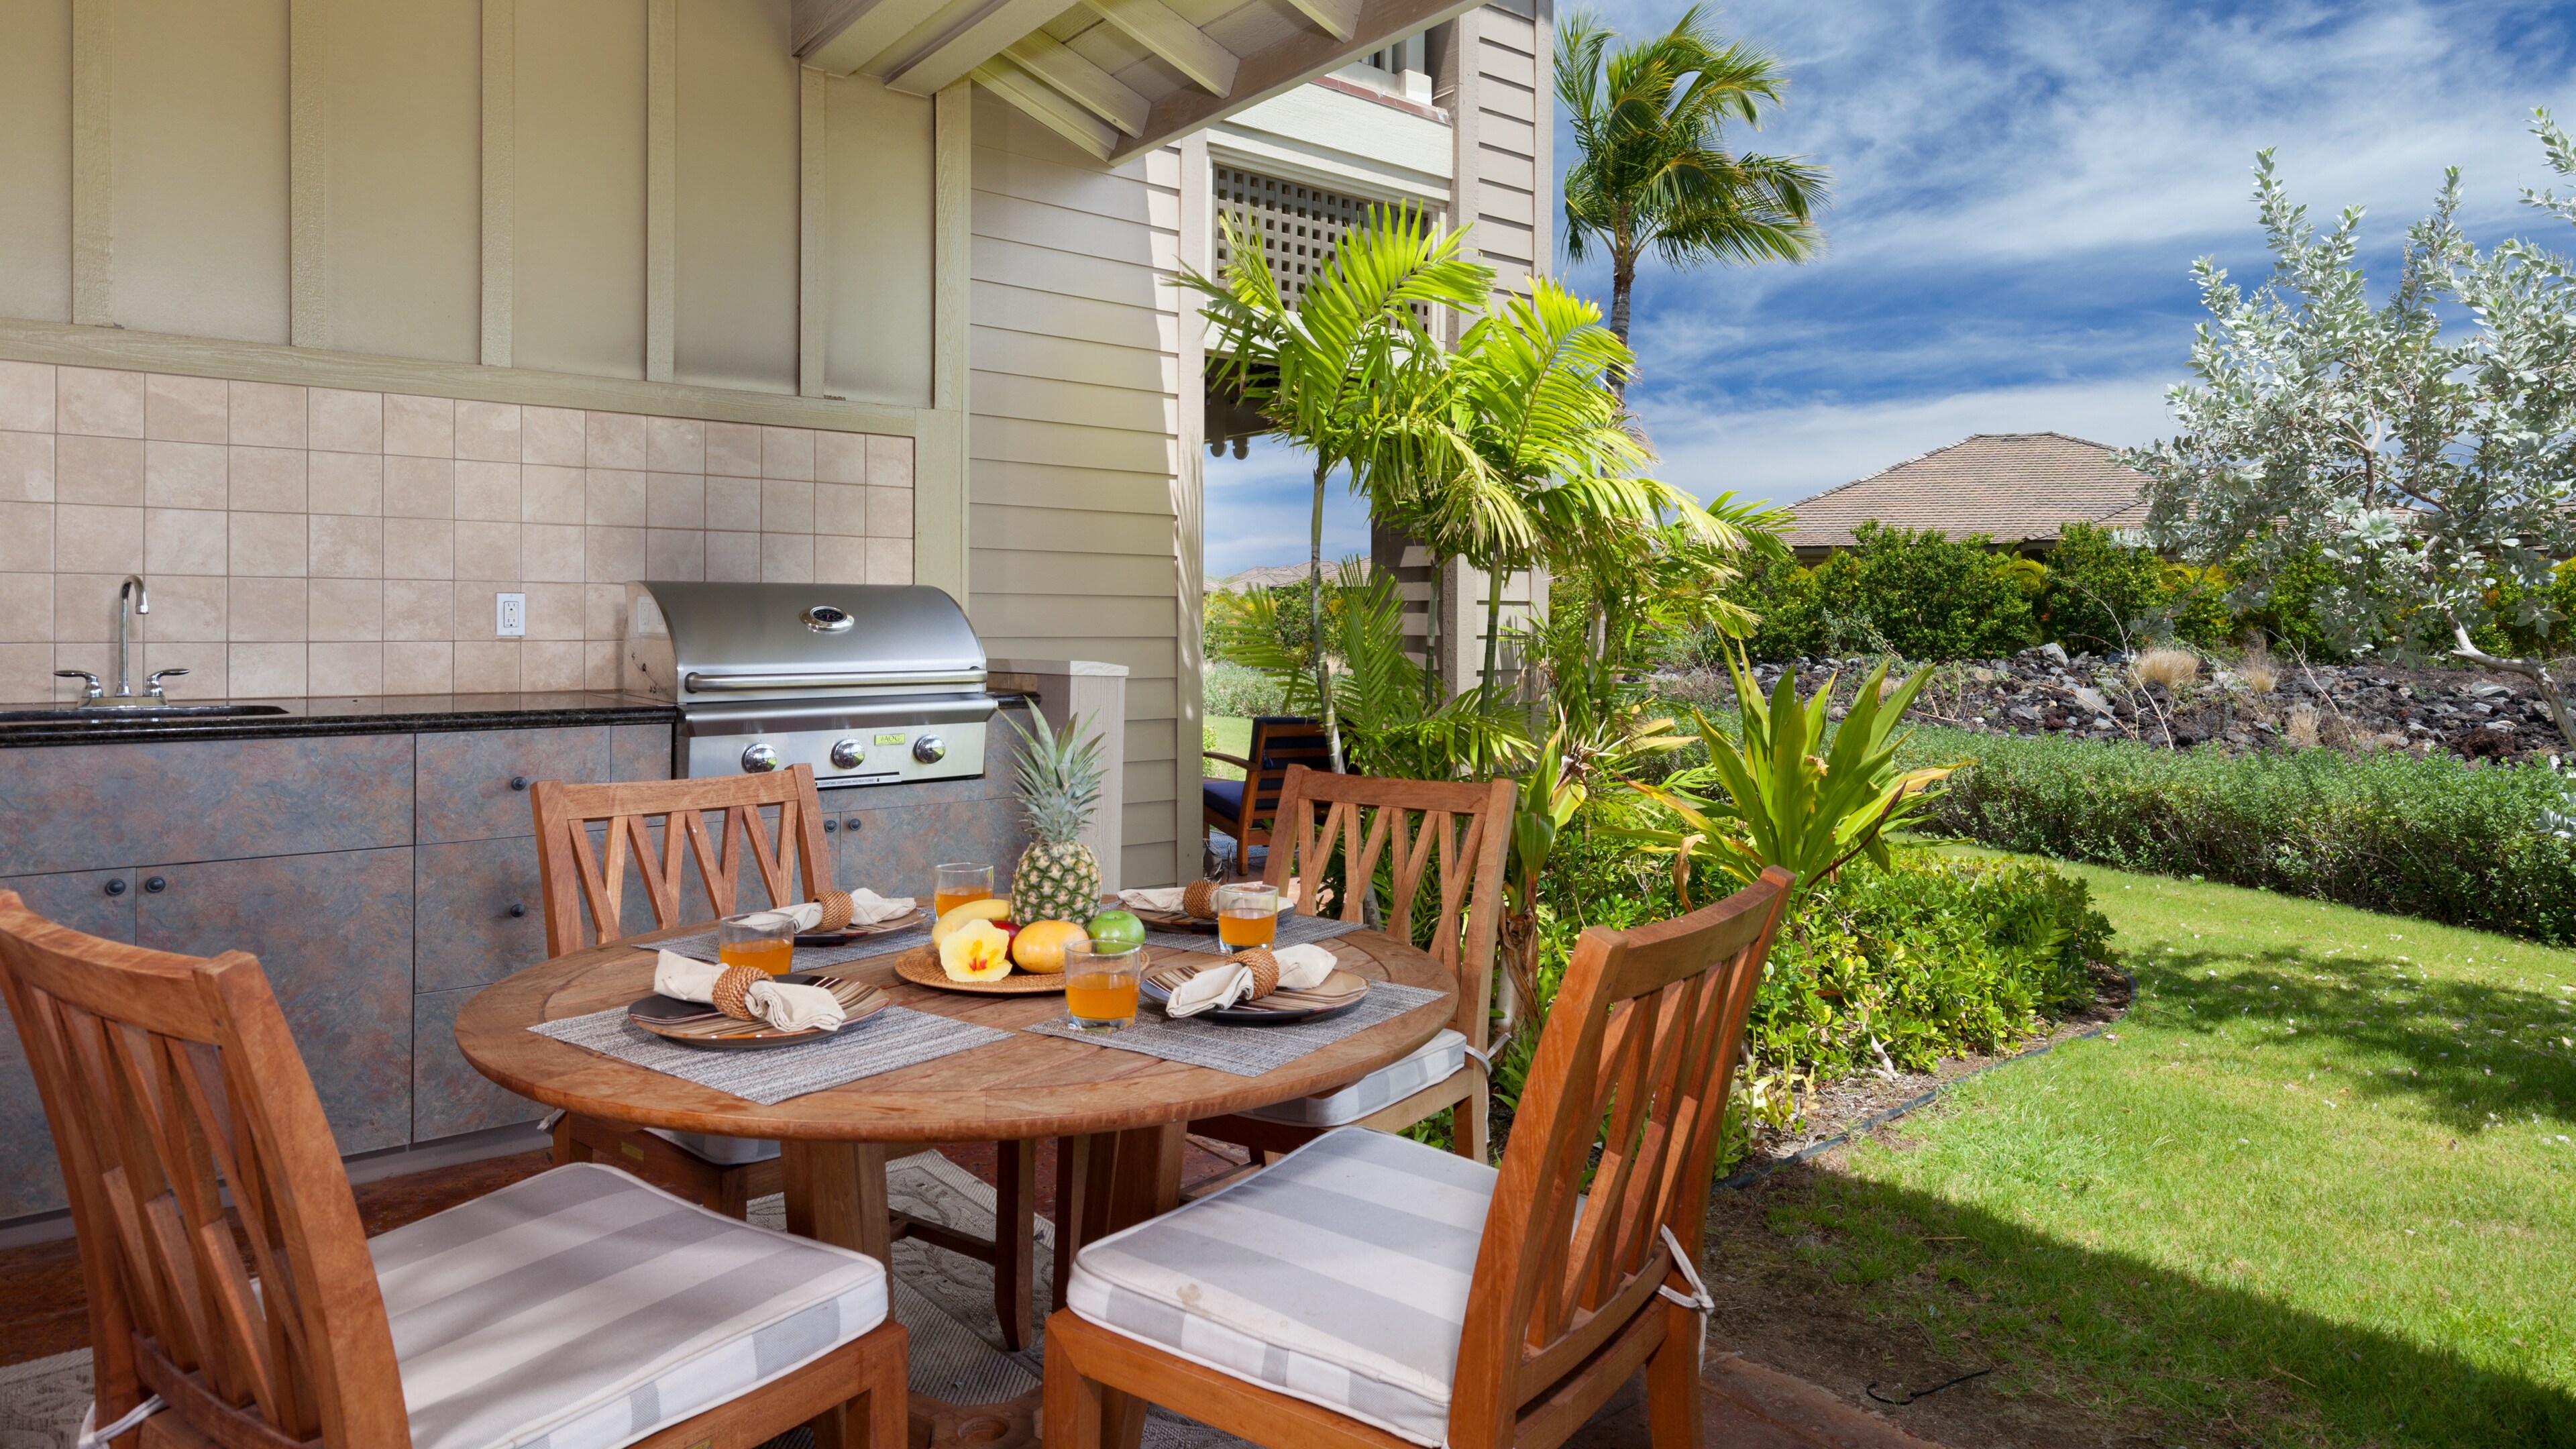 Covered lanai with private high end grill.